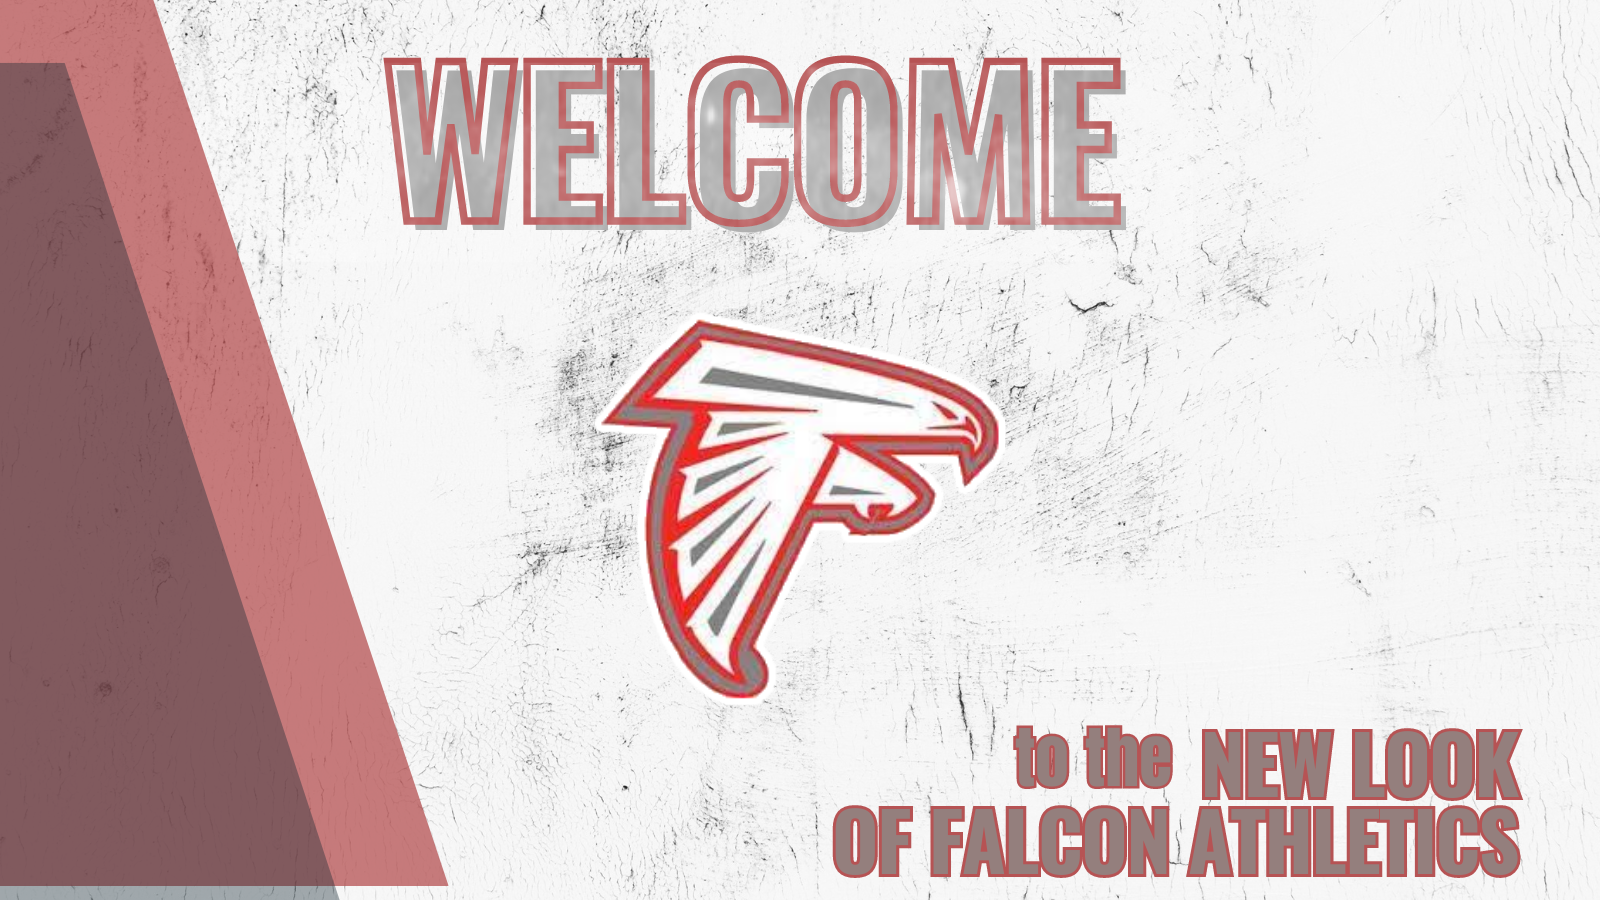 1712237269_CopyofWelcometoTwitterPost1copy.png - Image for 🎉 Exciting News for Falcon Athletics Fans! 🎉